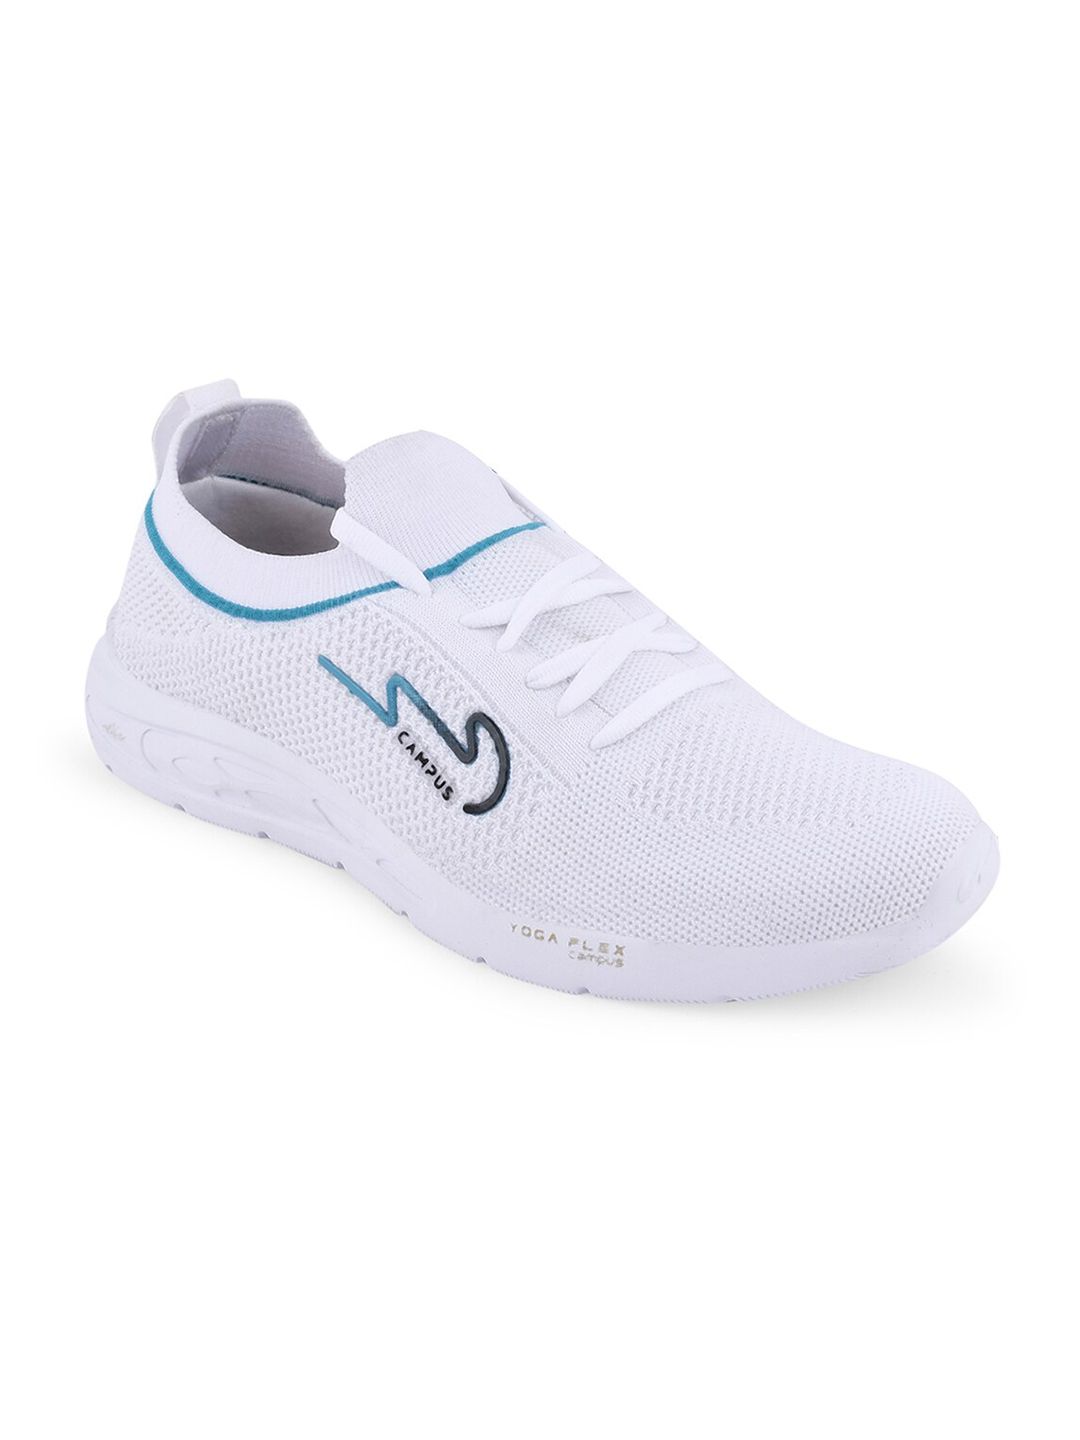 Campus Women White Mesh Running Non-Marking Shoes Price in India